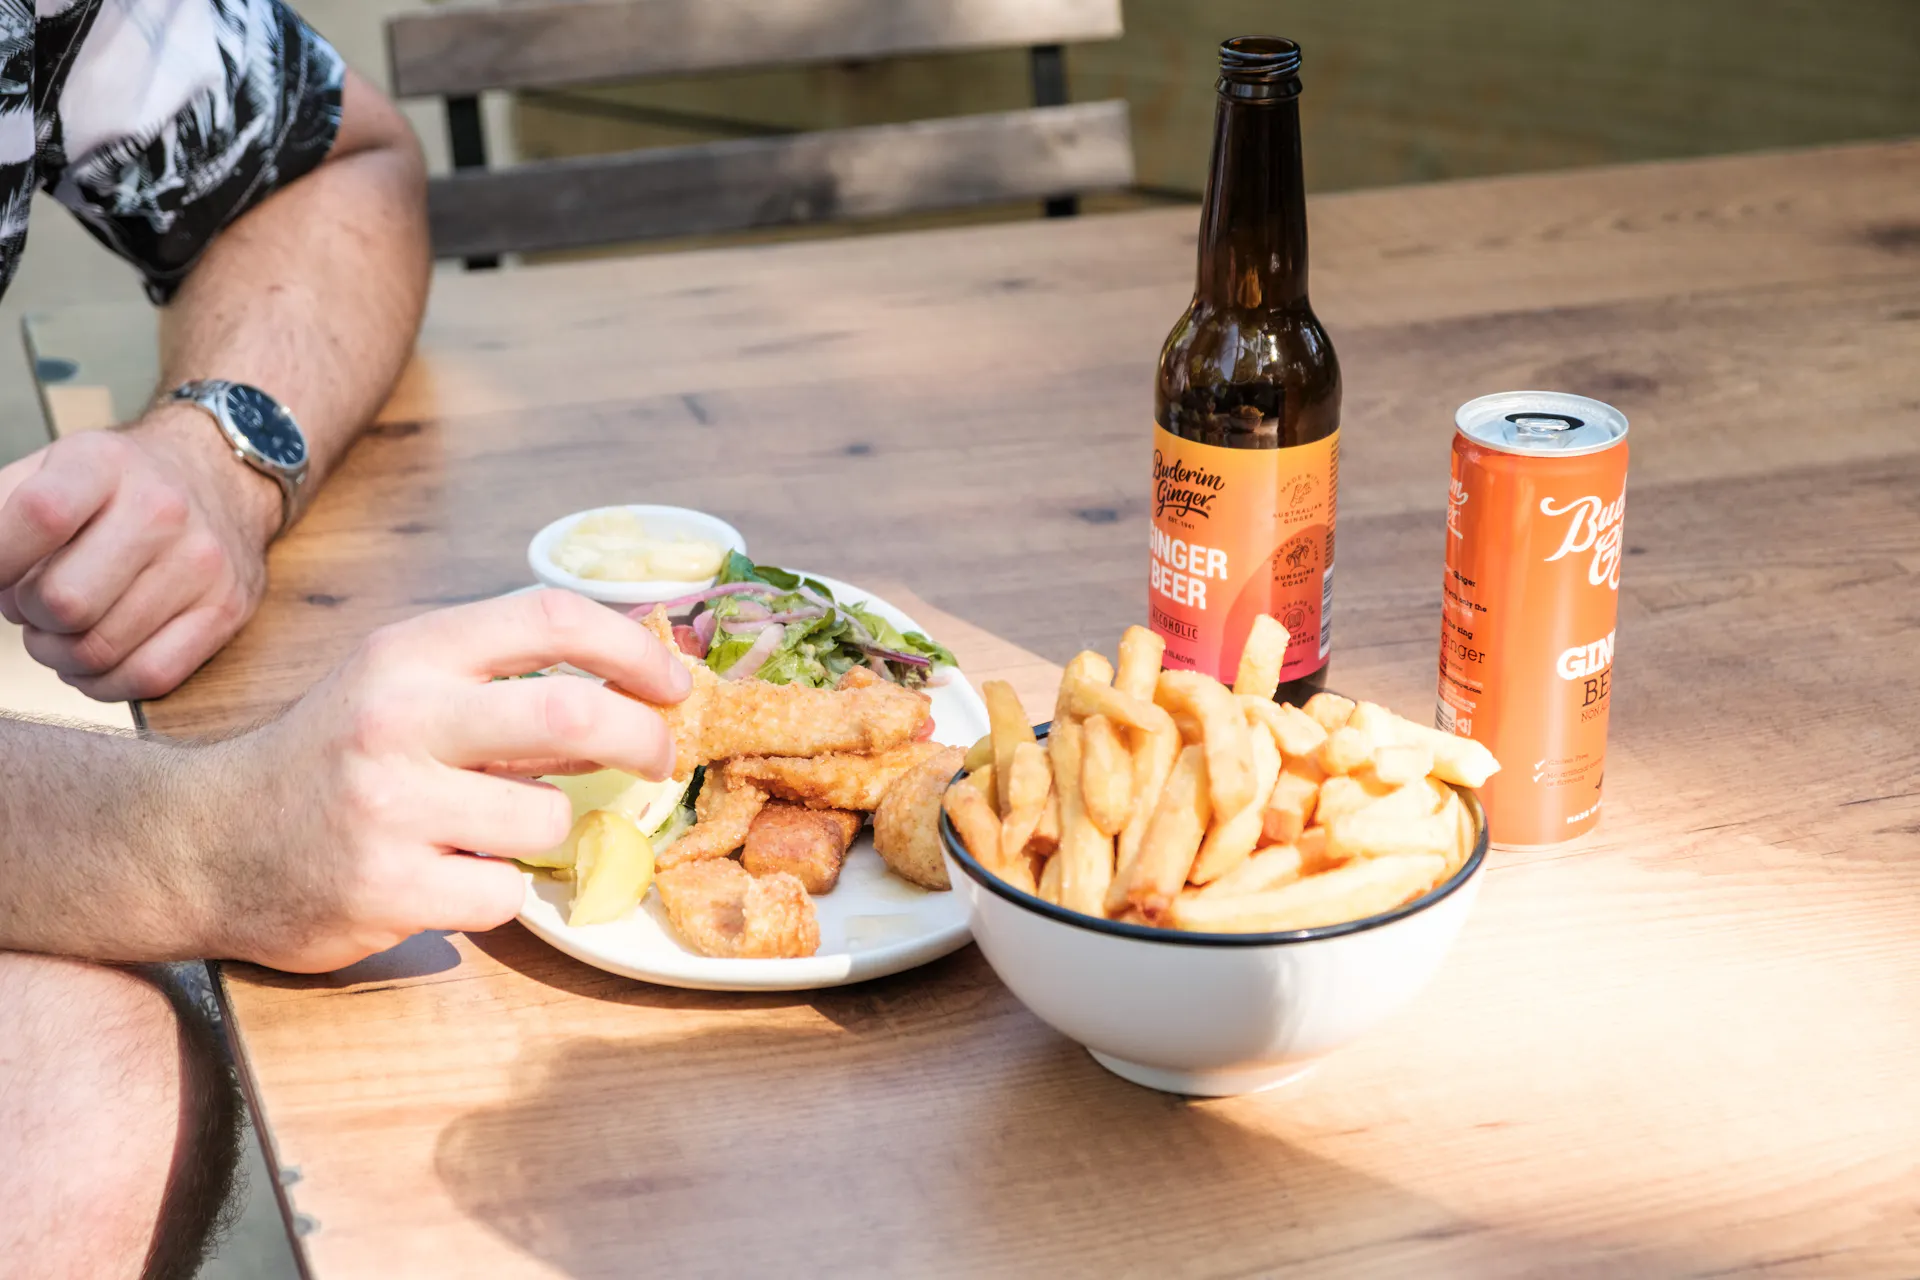 Share plates and Buderim Ginger Beer in the beer garden